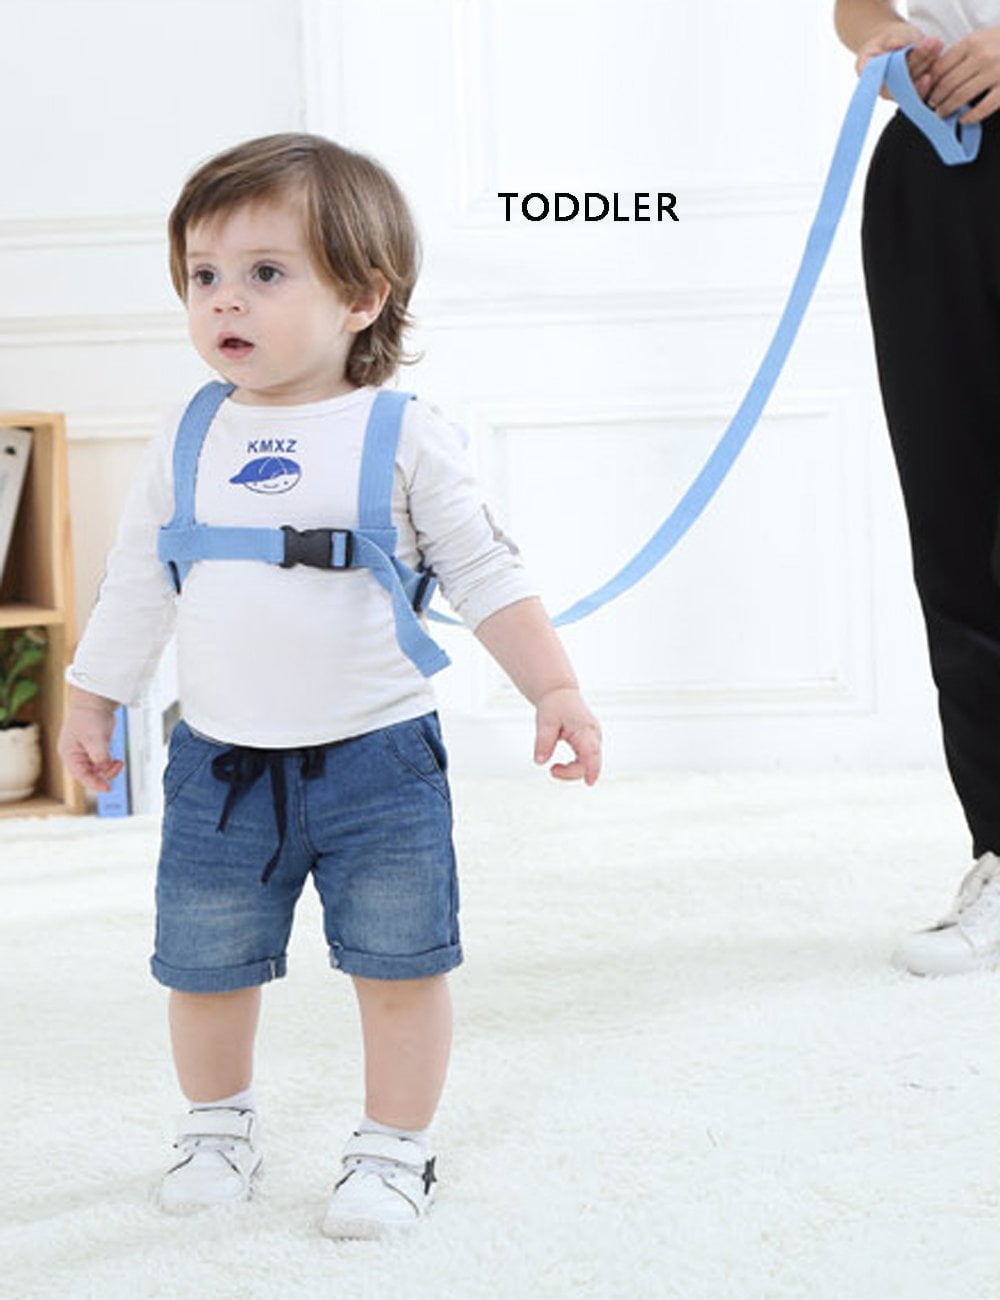 Toddler Anti-Lost Backpack Baby Safety Walking Harness Reins Leash for Child Kid 